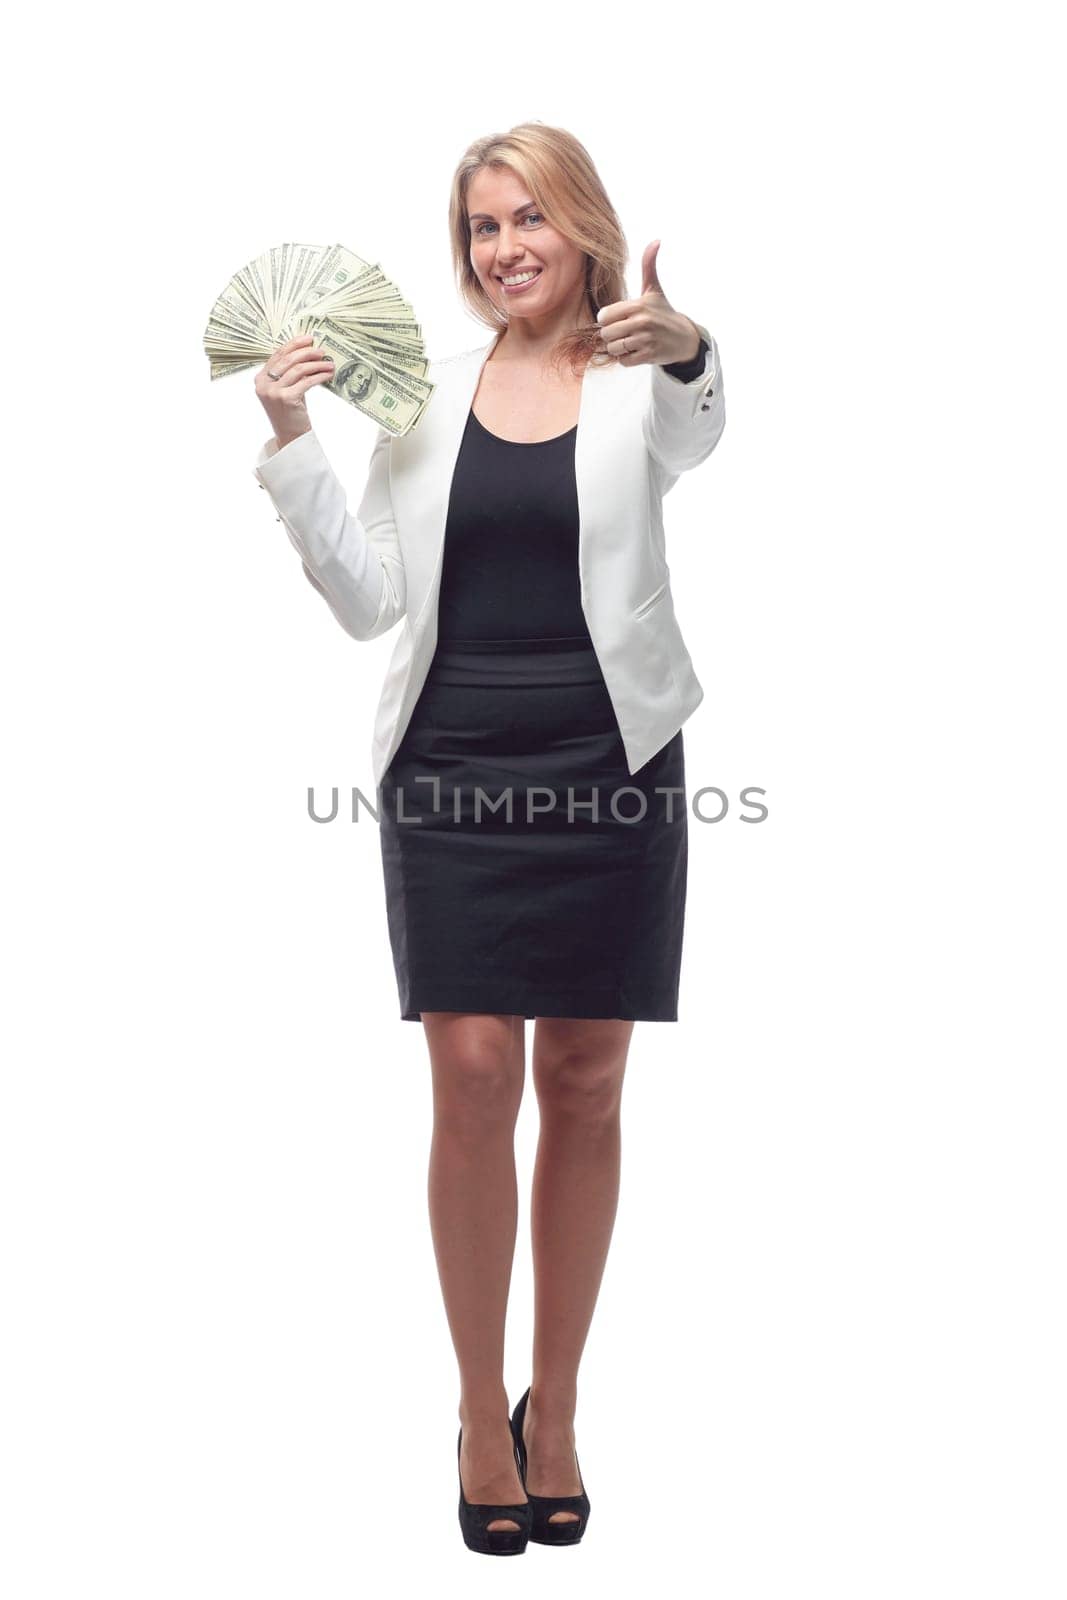 in full growth. businesswoman with a large wad of bills. isolated on a white background.